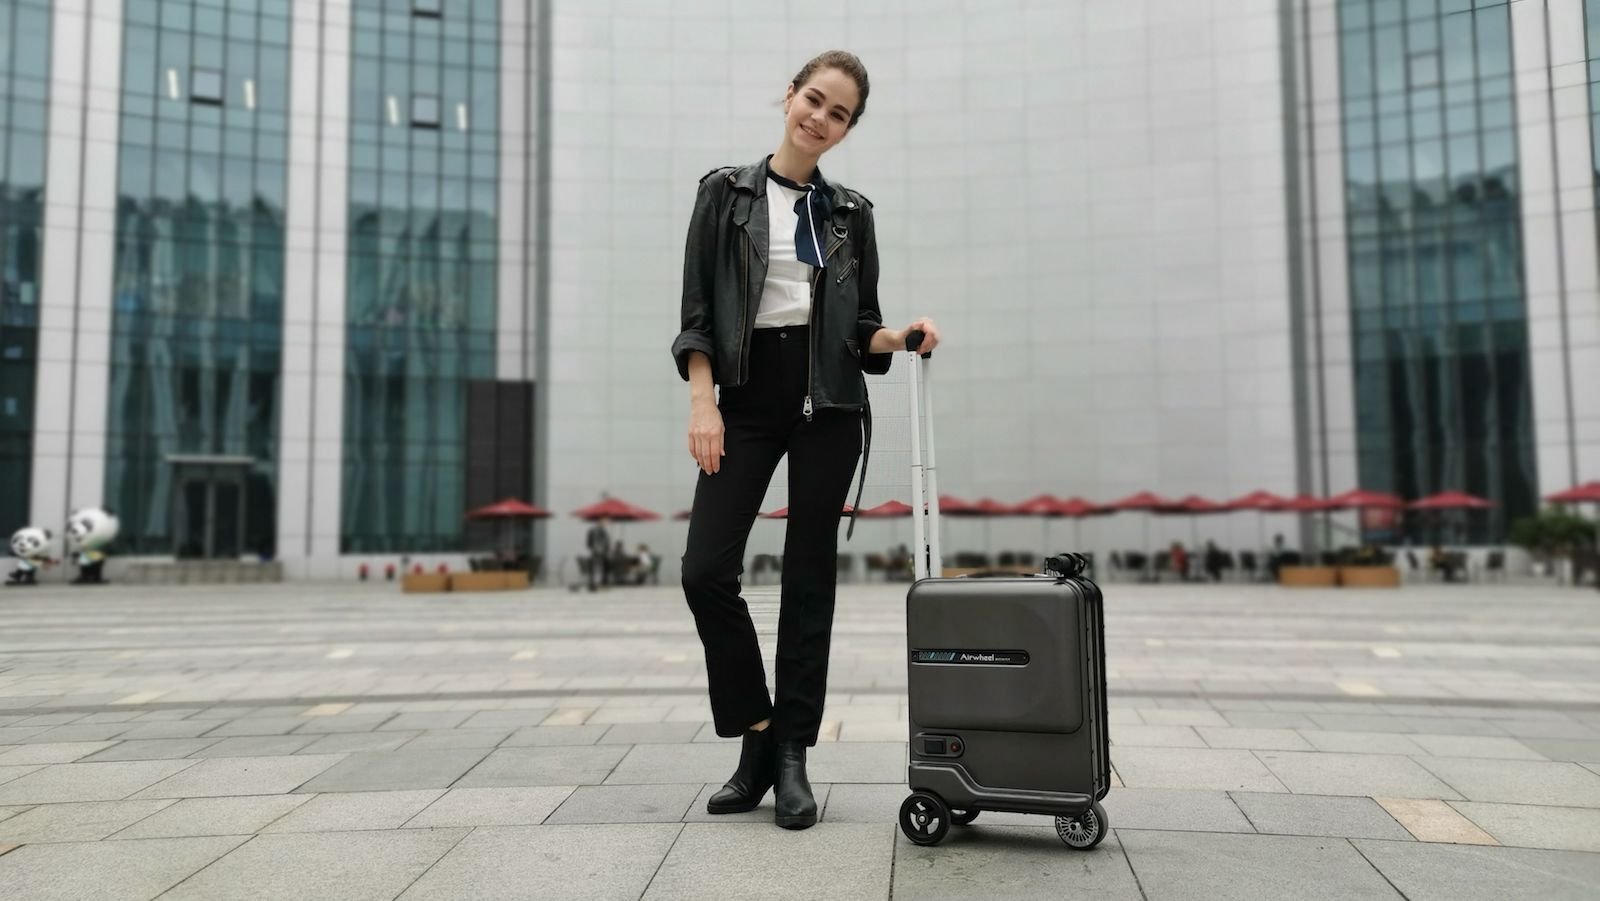 Rydebot Smart Suitcase Series has built-in dual USB ports and a 100-watt electric motor